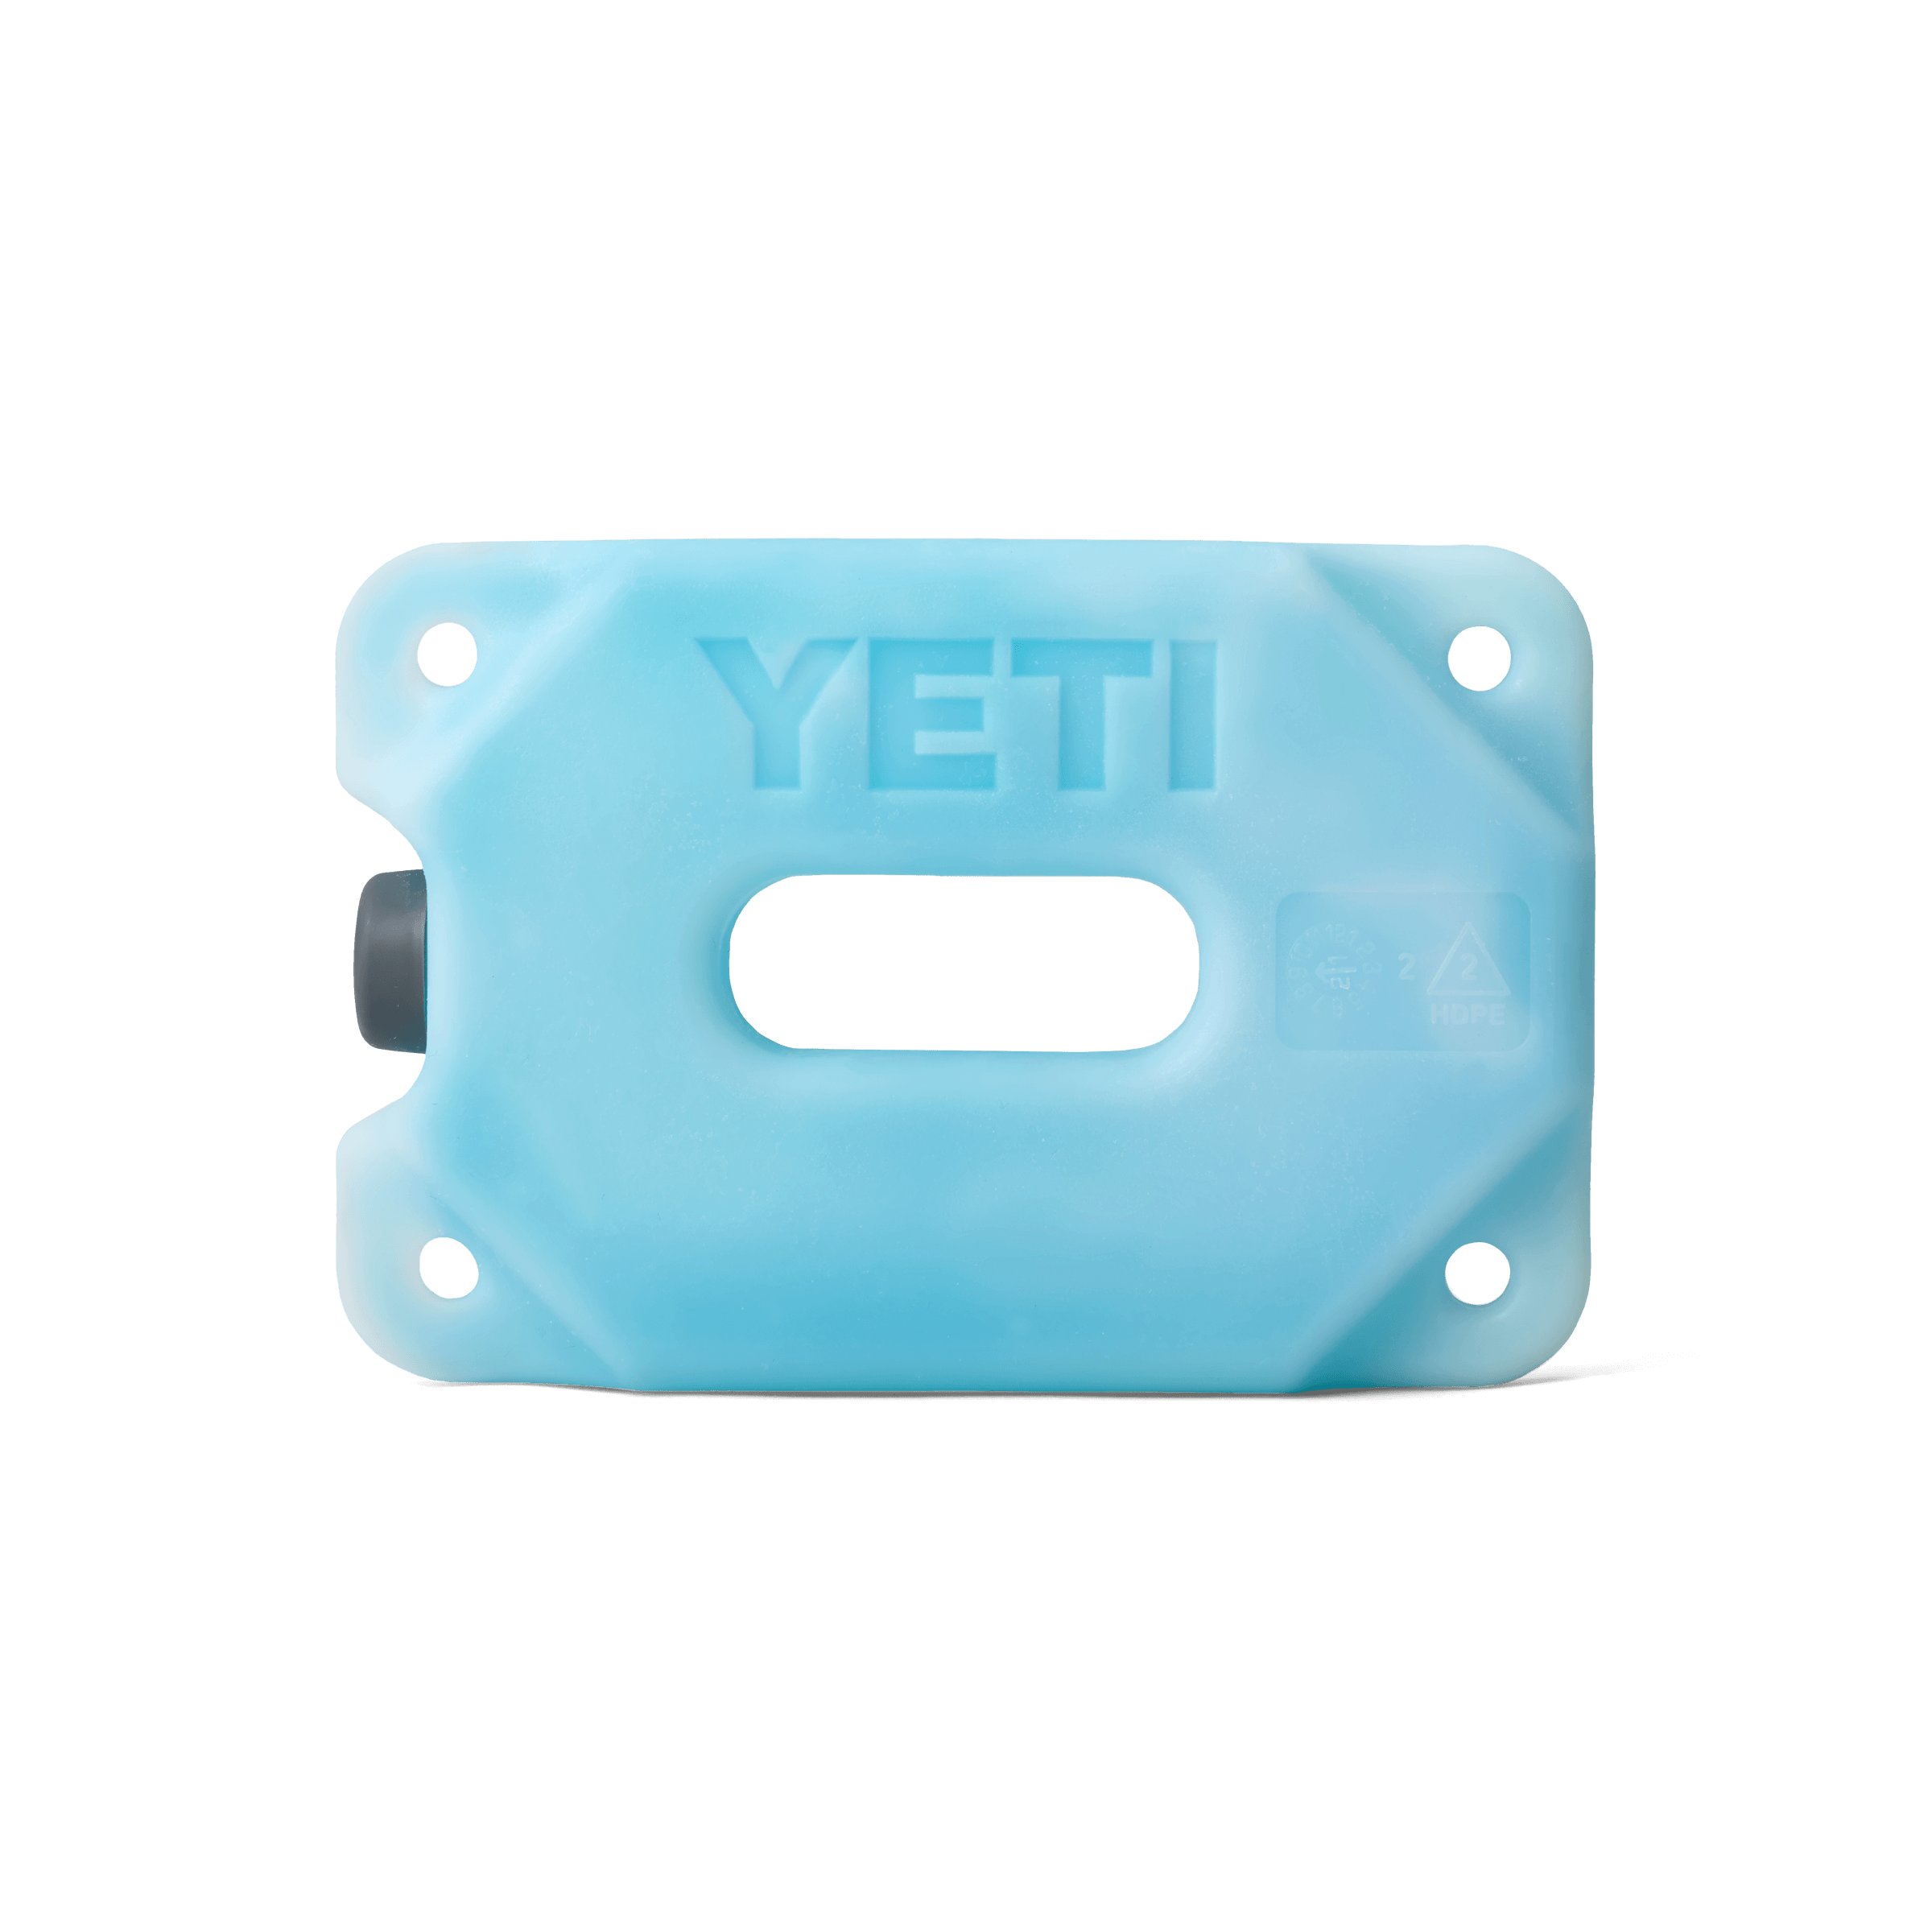 Best Selling Shopify Products on fr.yeti.com-4